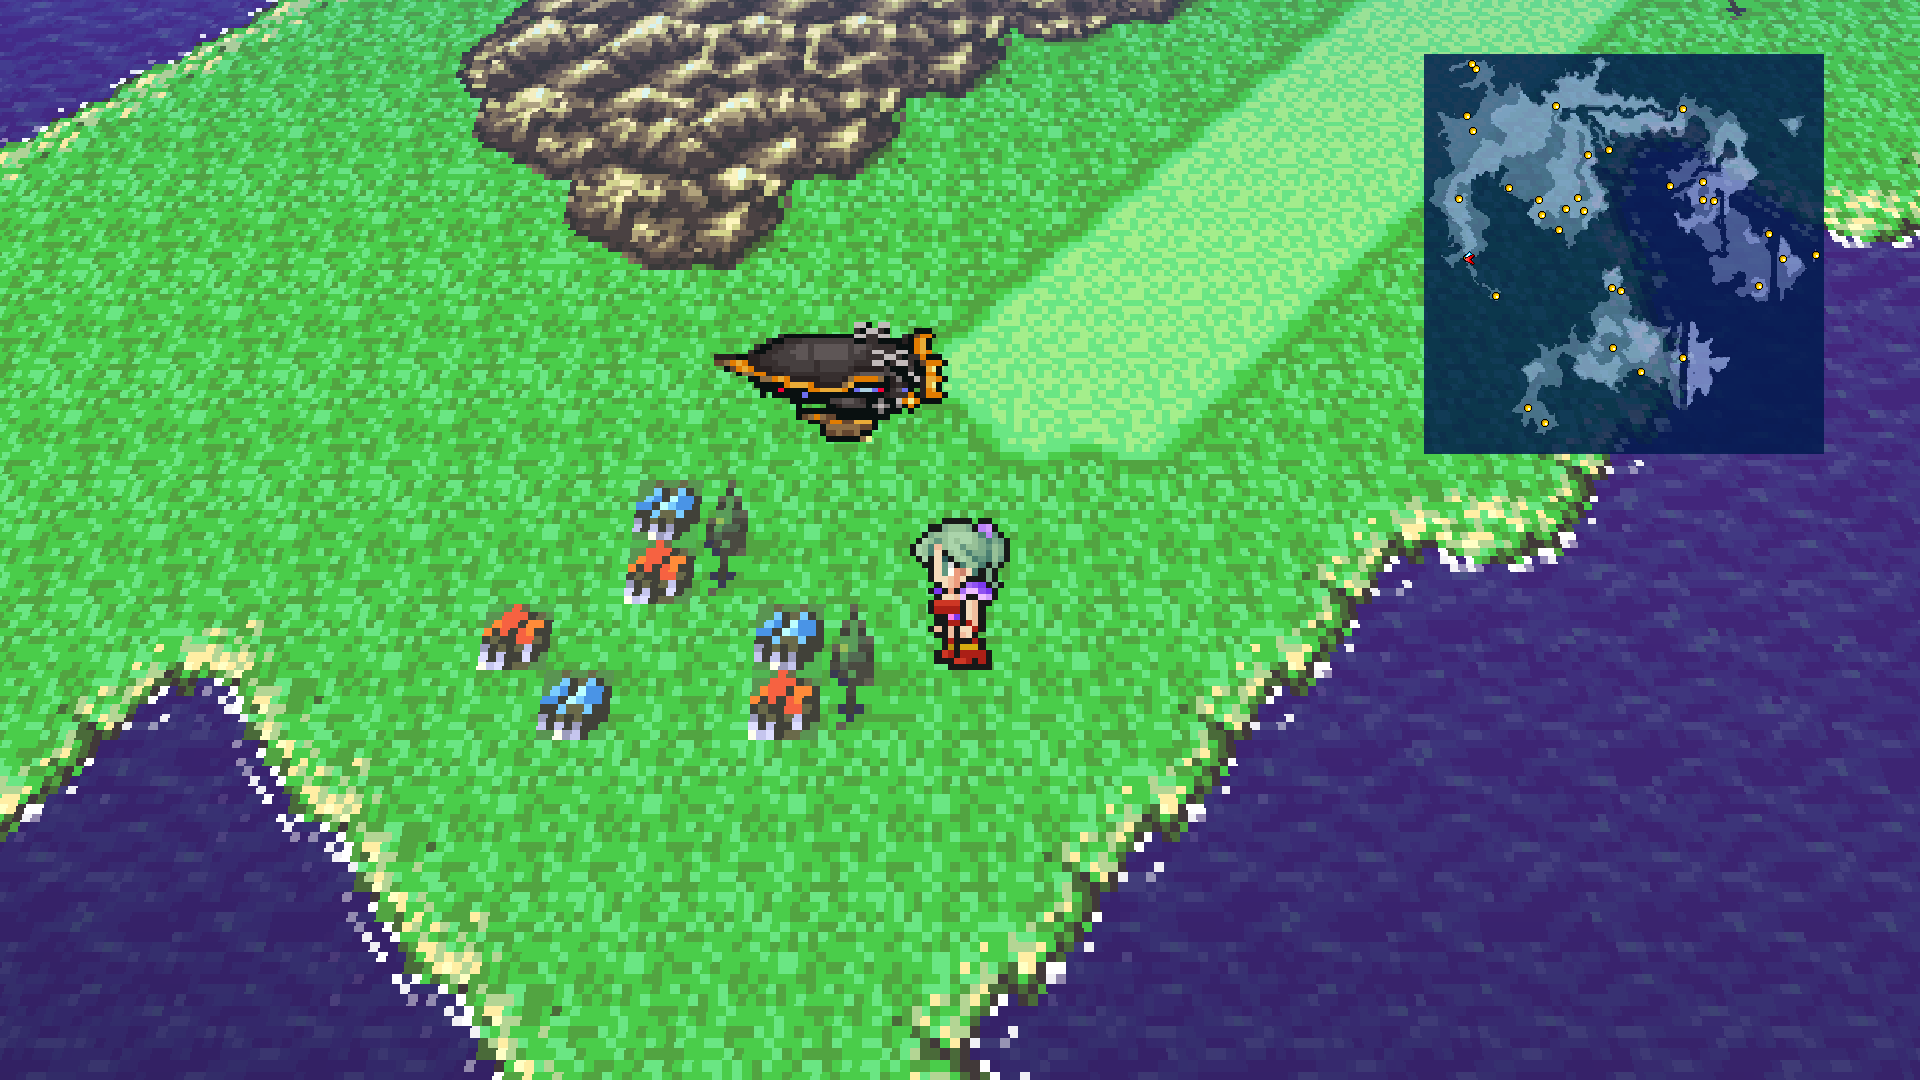 Final Fantasy VI (for Android) Review